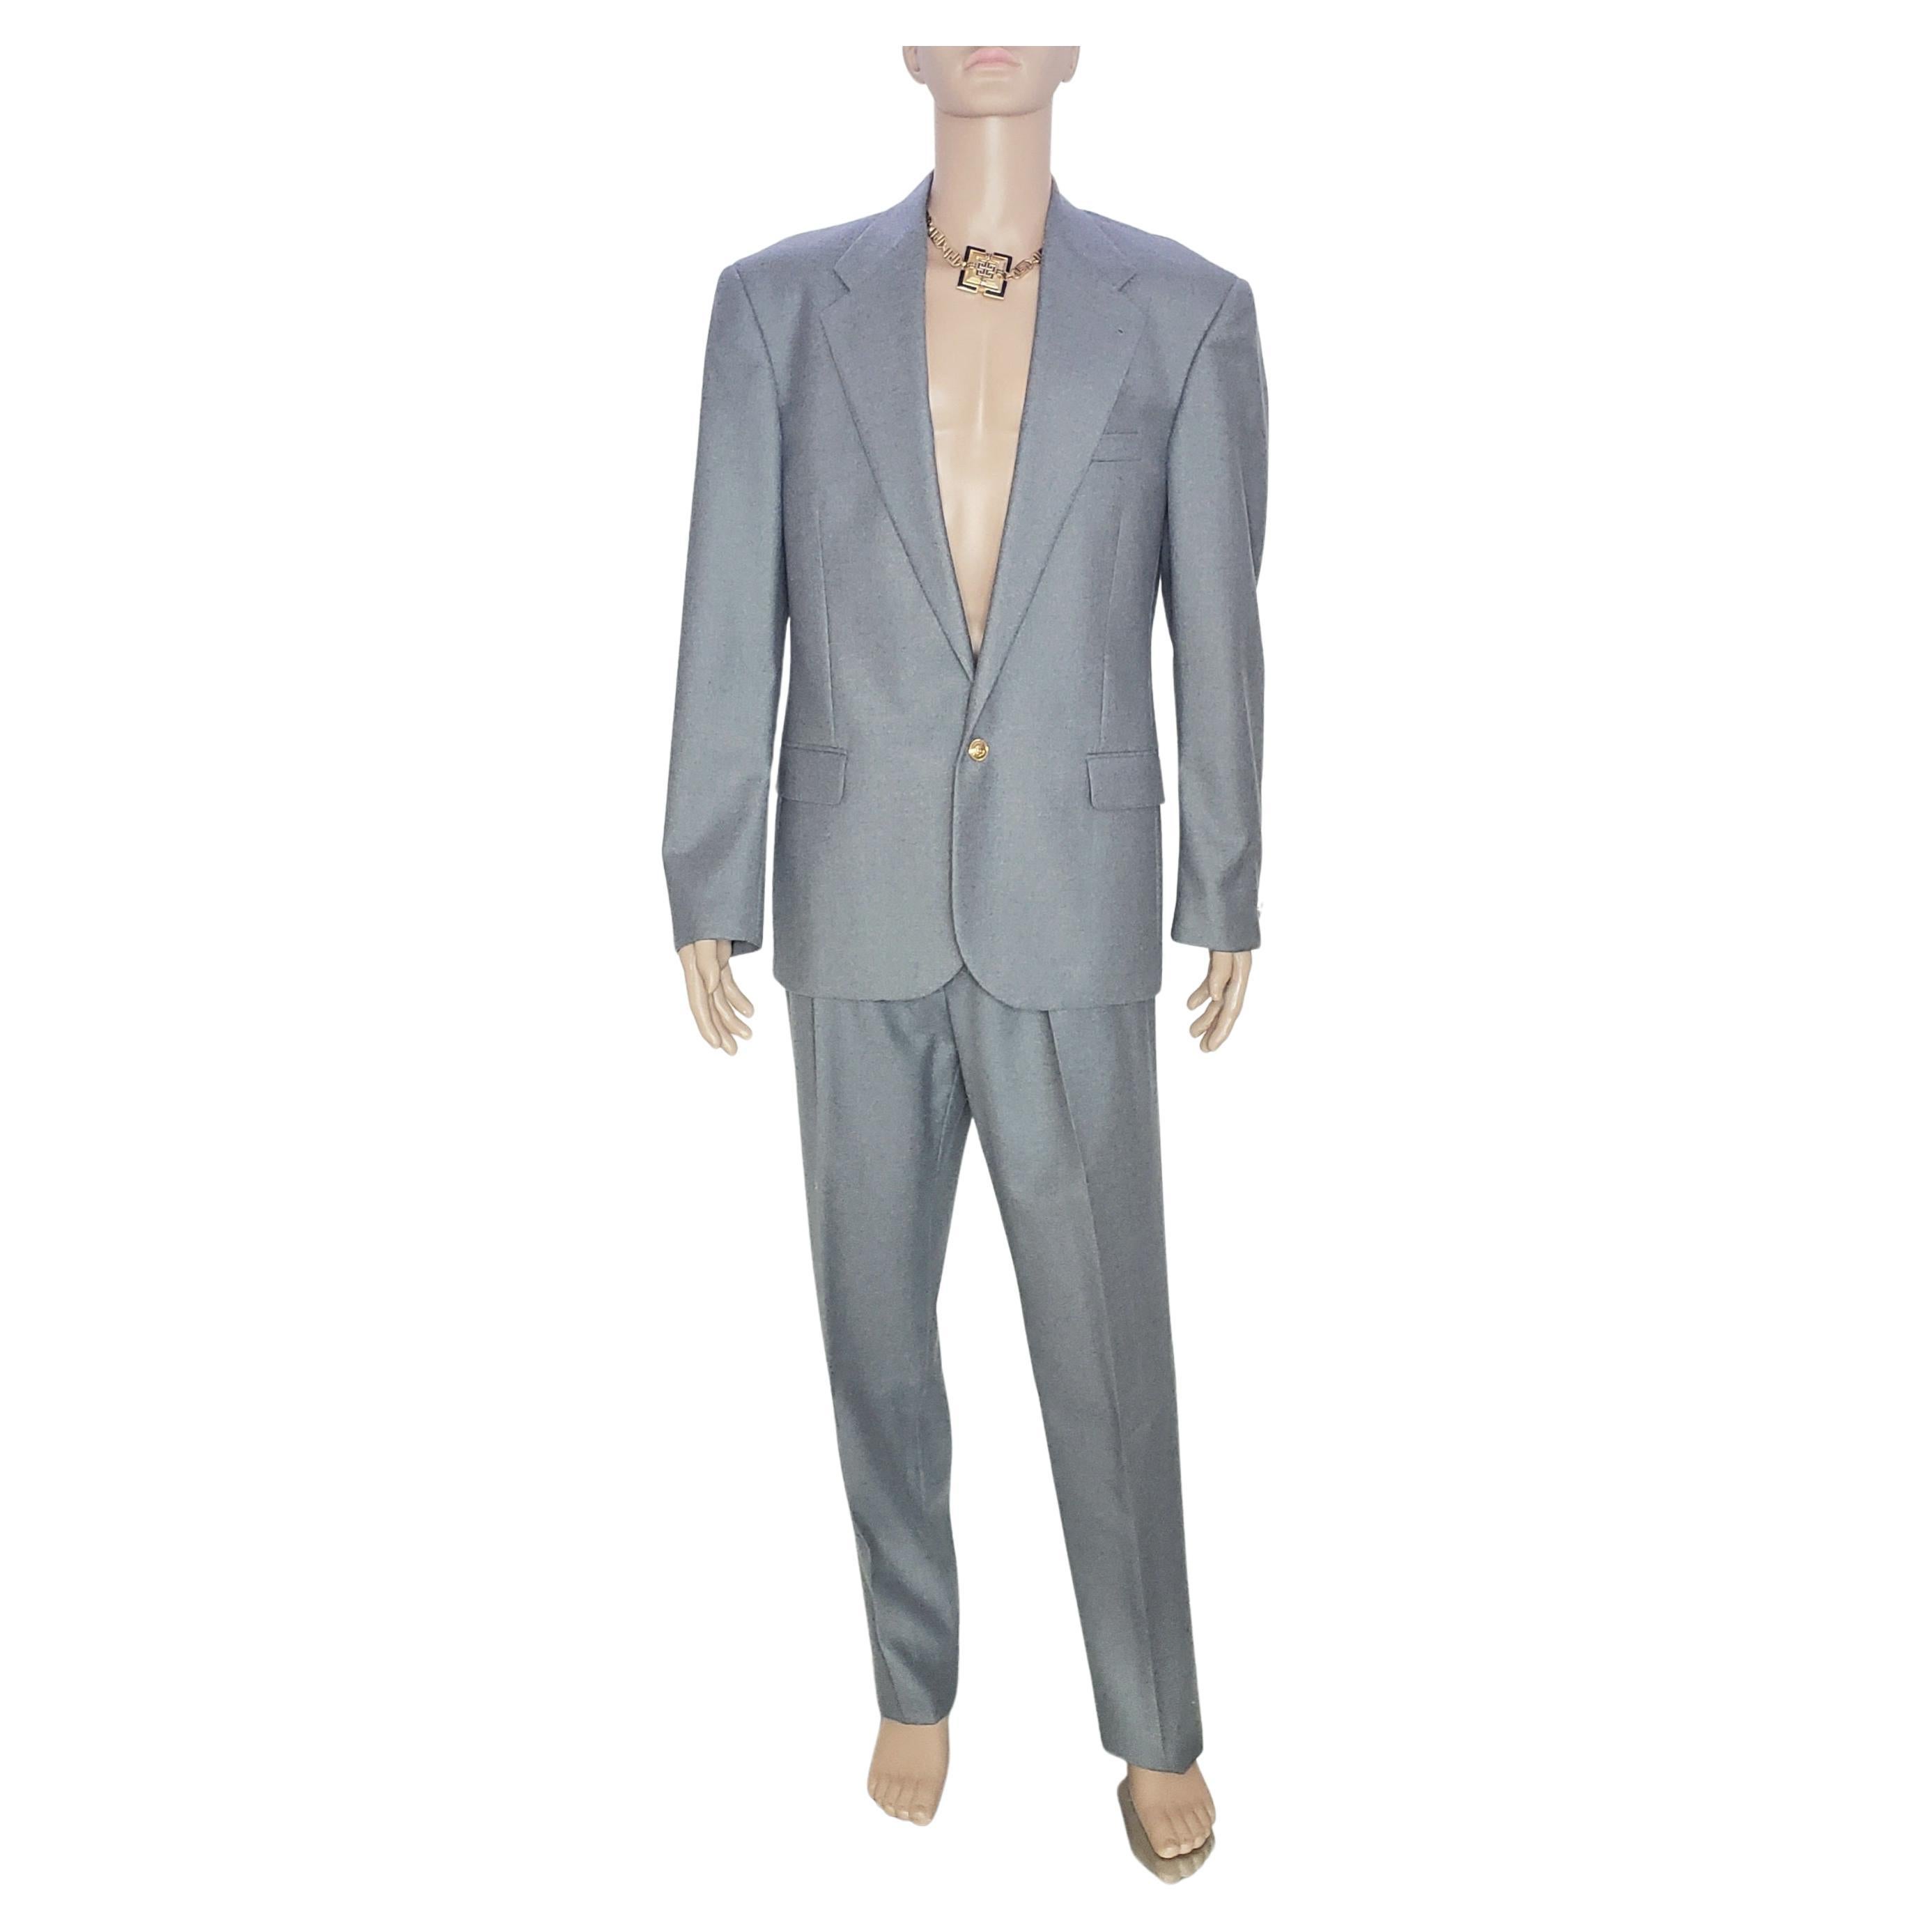 VERSACE F/W 2013 look # 45 BRAND NEW GRAY WOOL SUIT 48 - 38 (M) For Sale